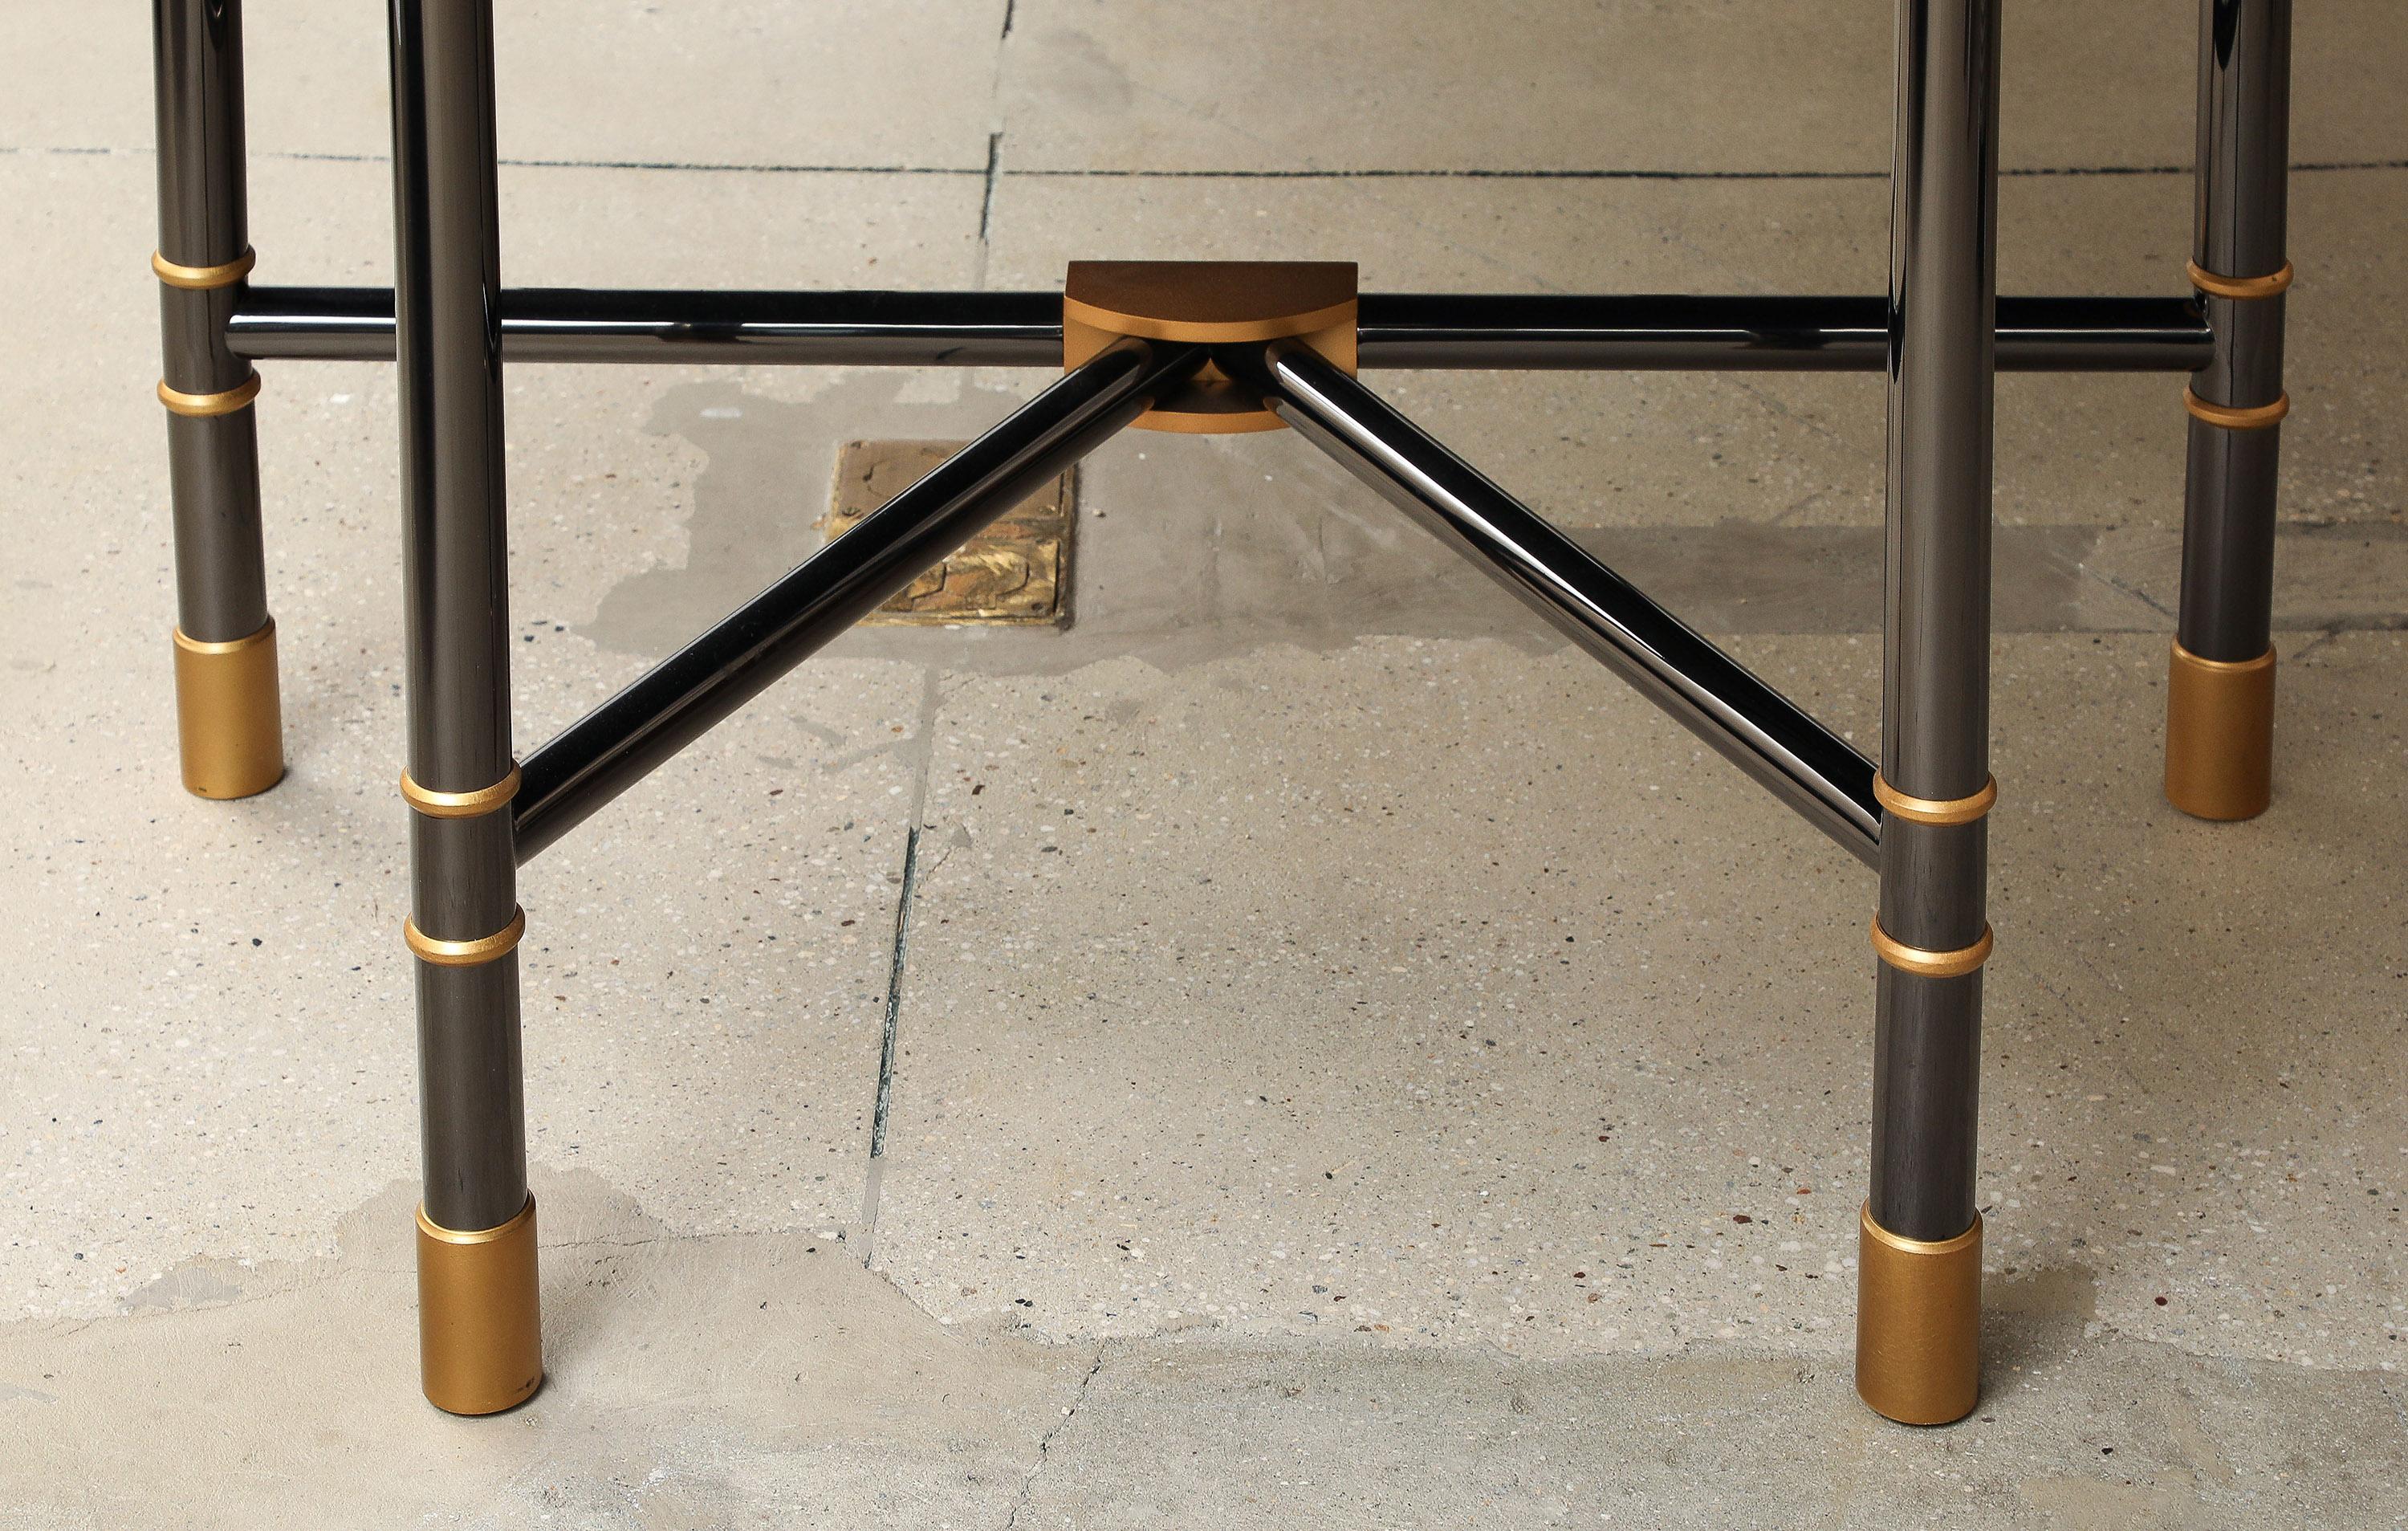 A Superb and Unique Bronze and Granite Dining Table. The custom bronze table having a doré bronze top with granite inserts over a steel frame. The whole resting on a patinated and doré bronze base. Signed with Karl Springer label.